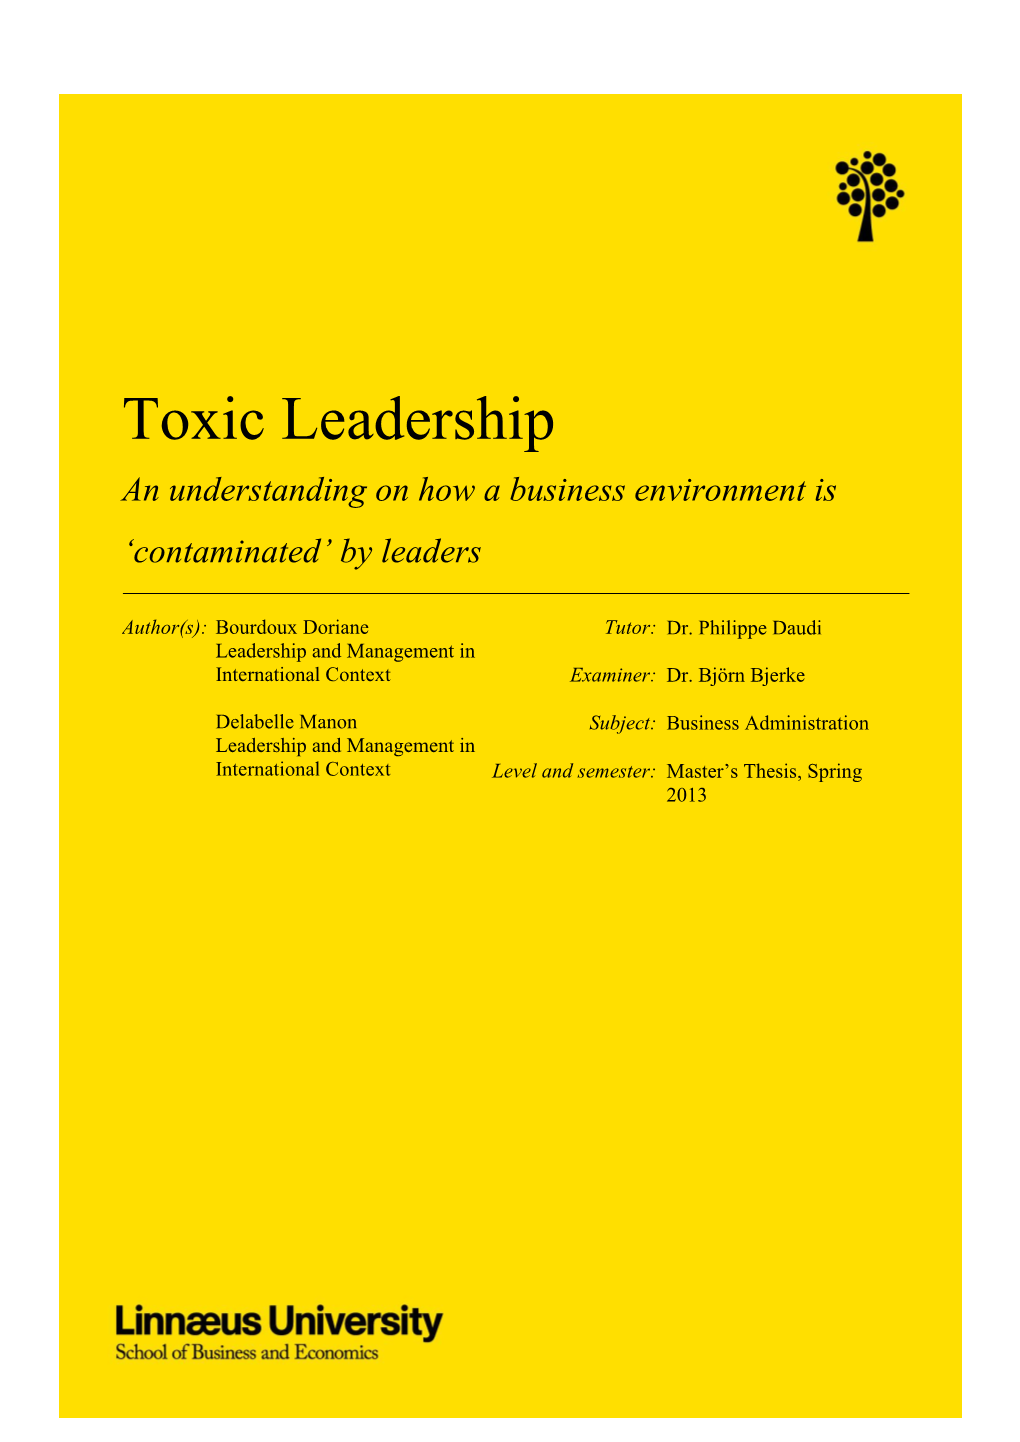 Toxic Leadership an Understanding on How a Business Environment Is ‘Contaminated’ by Leaders